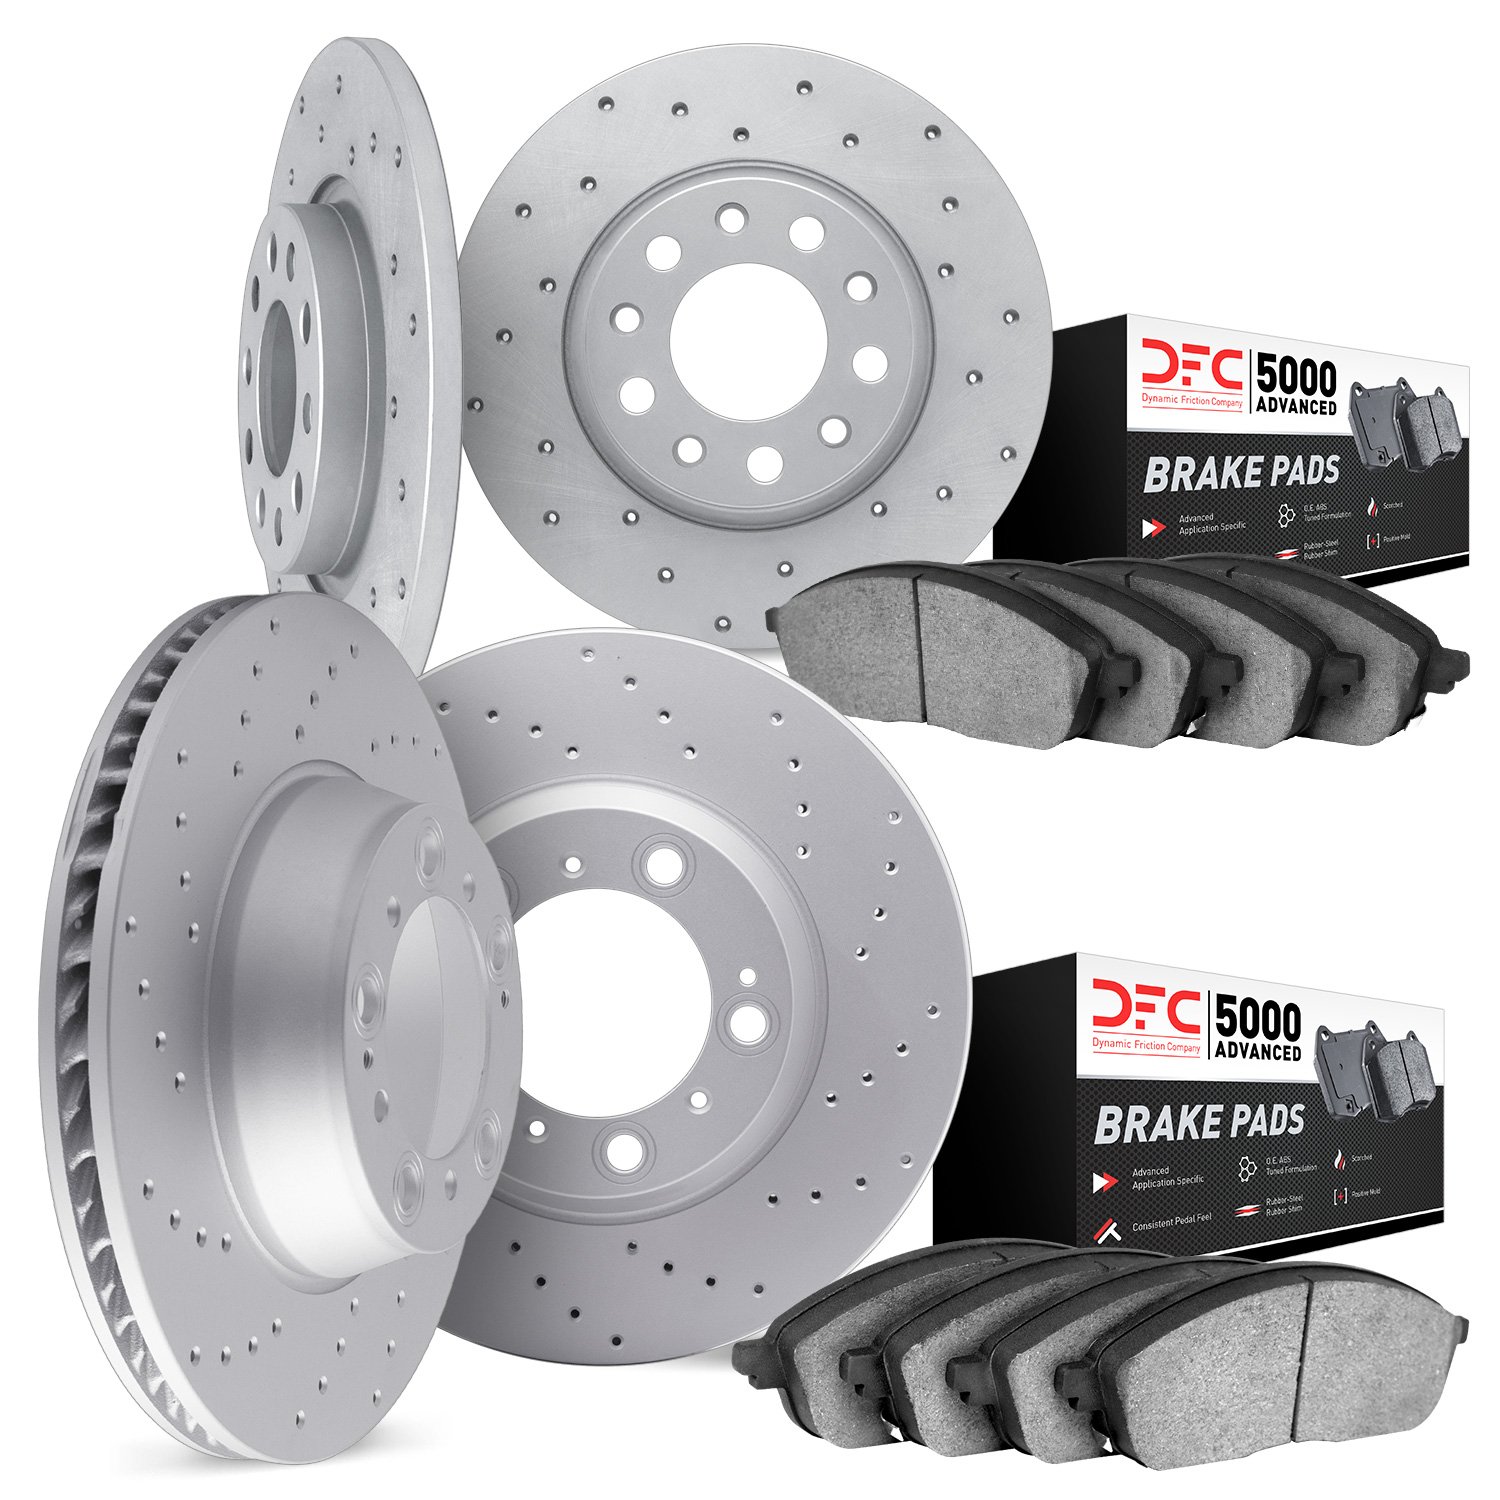 2704-59081 Geoperformance Drilled Brake Rotors with Active Performance Pads Kit, 2002-2004 Acura/Honda, Position: Front and Rear